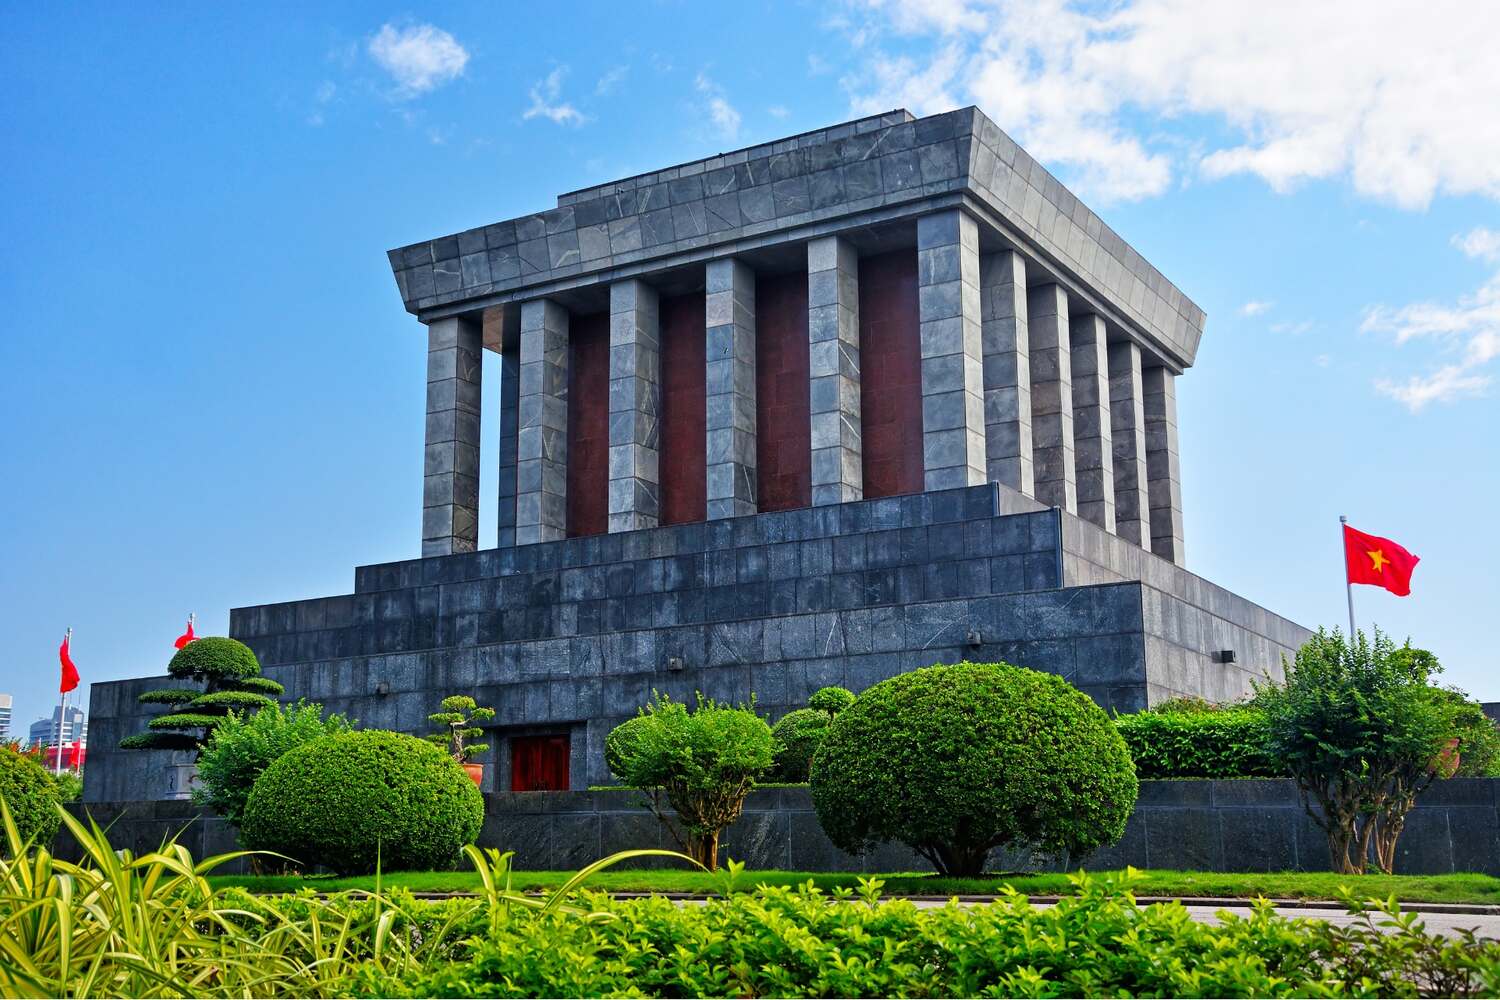 Ho Chi Minh Mausoleum in Hanoi, an imposing gray building with Vietnamese flags and manicured greenery.